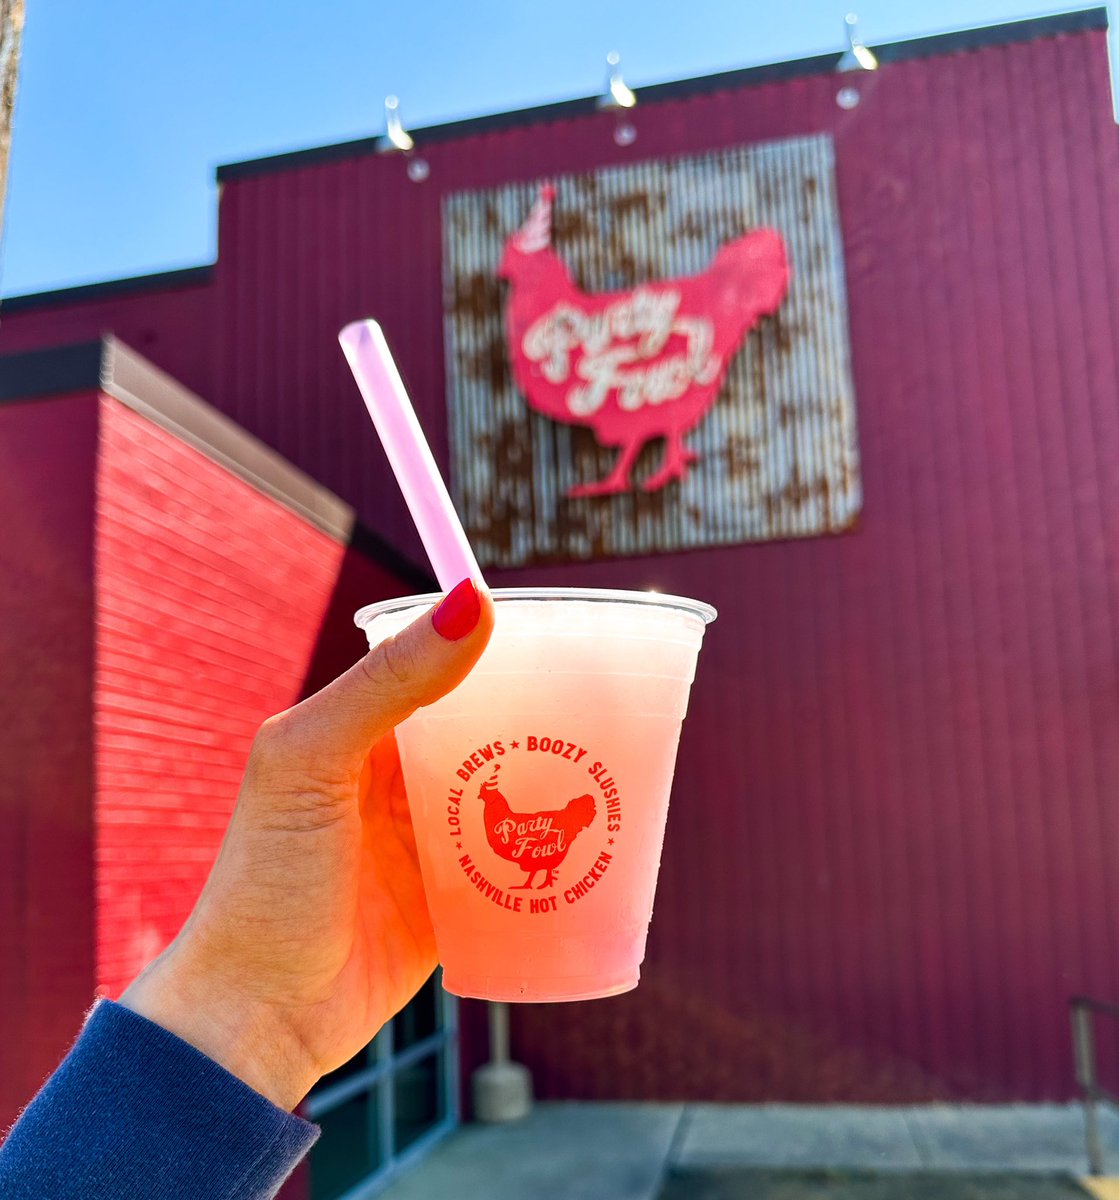 Sun's Out, Slushies Out!☀️ Swing on by to make this warm day a cool escape with our signature boozy slushies!🍹